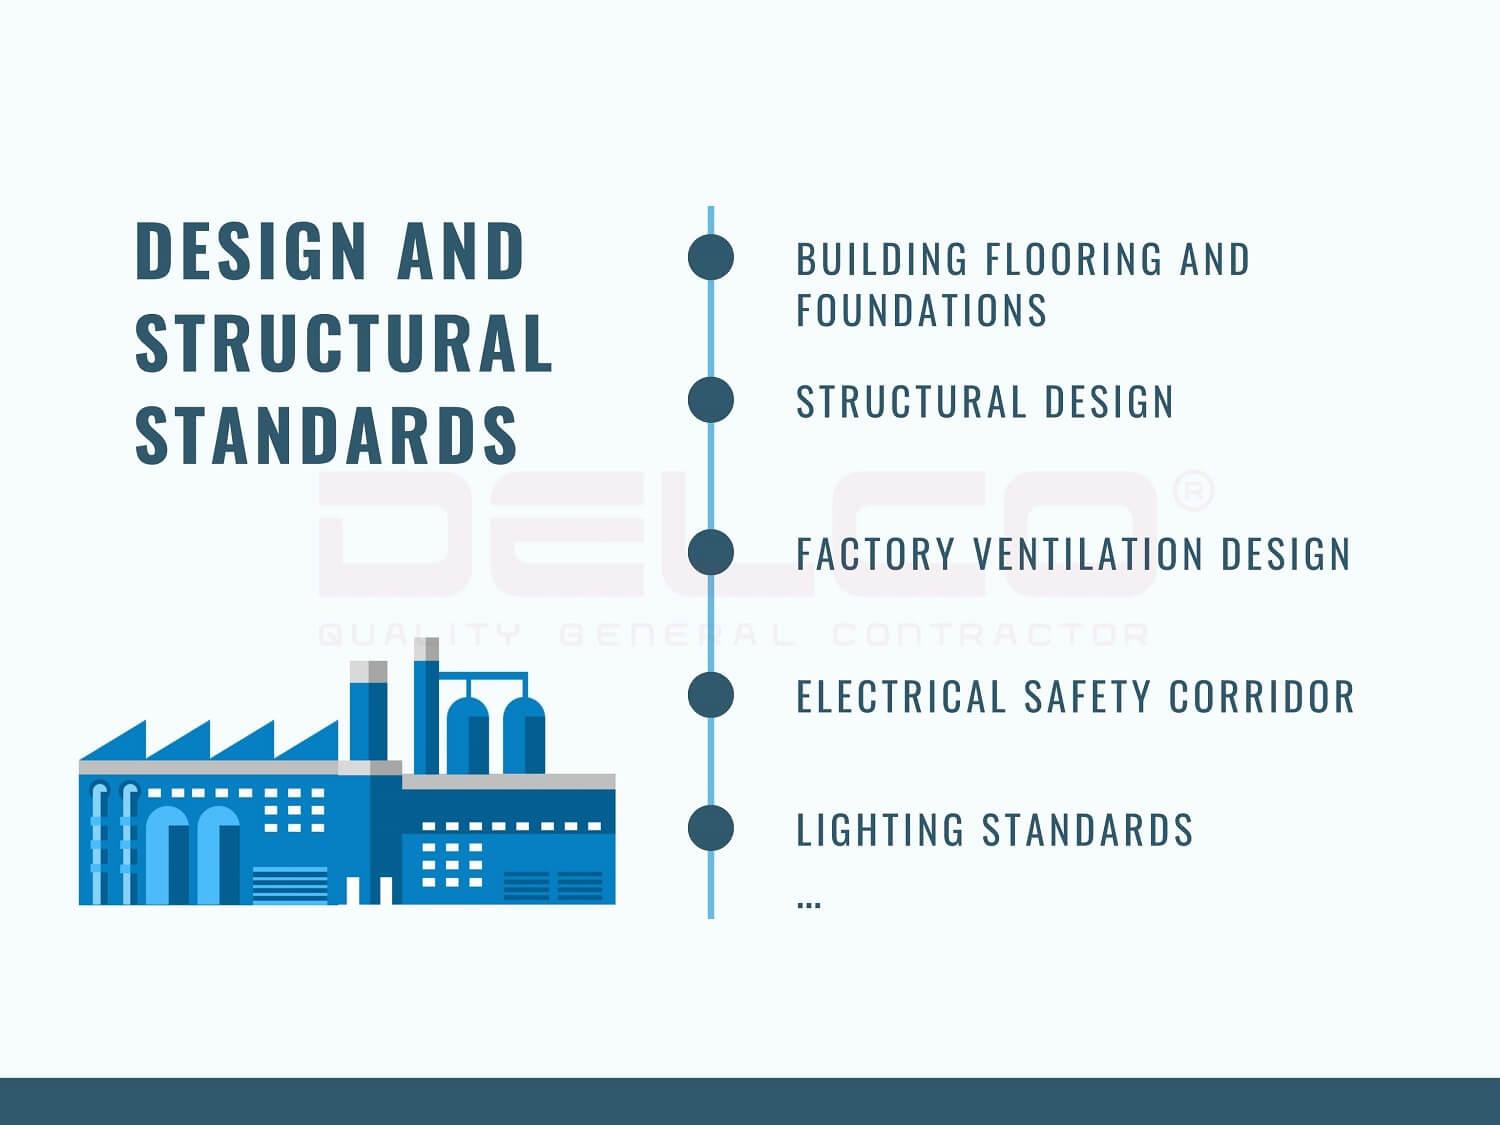 Design and structural standards